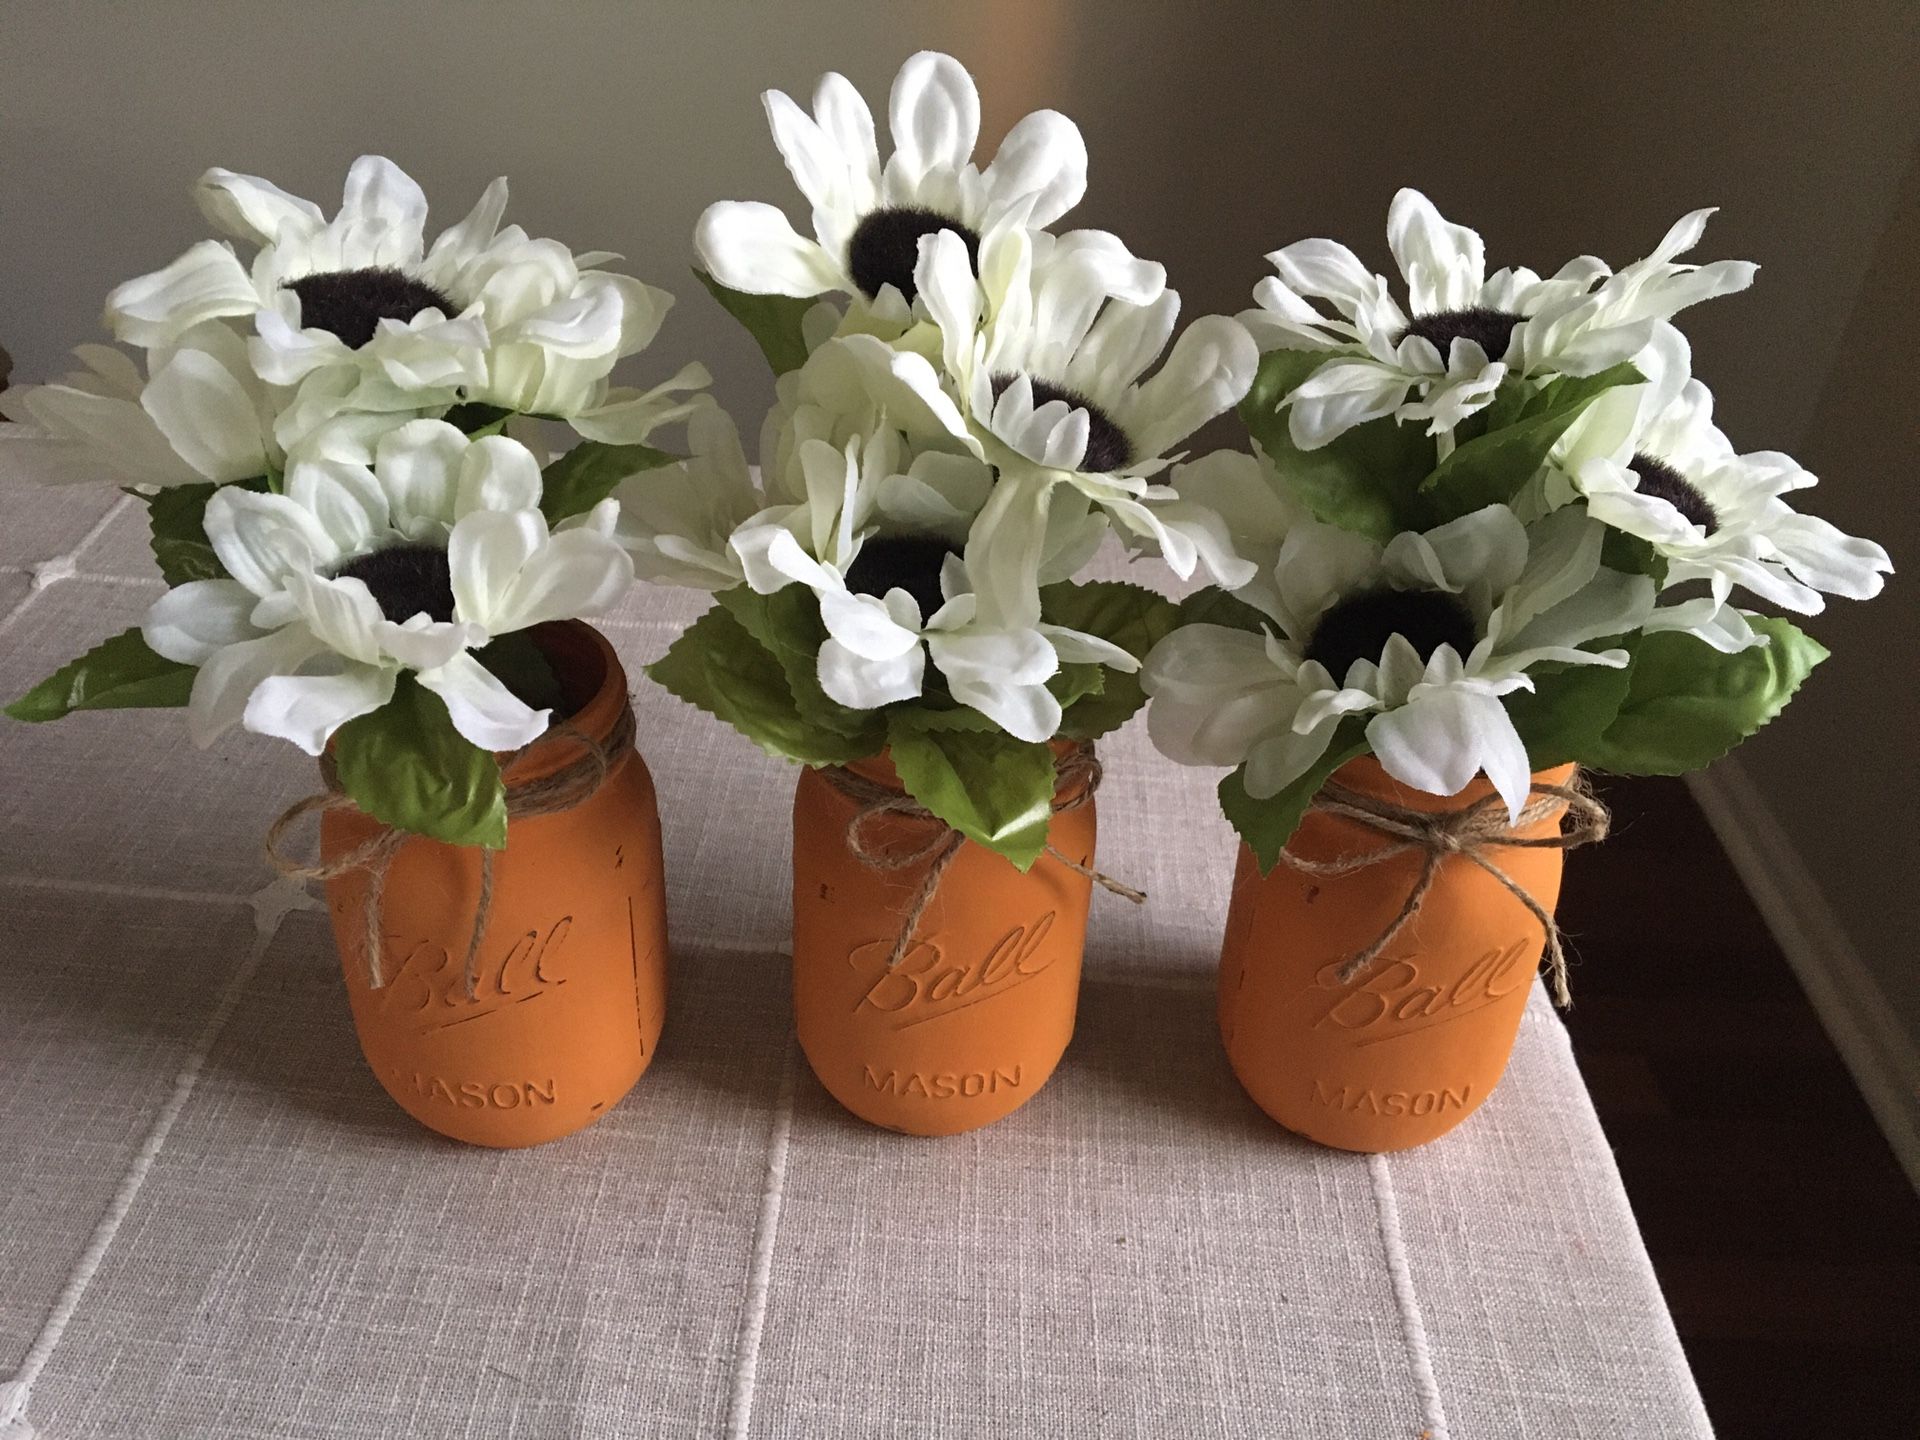 Distressed mason jar vases with flowers included!! Jar/flower choices shown in photos